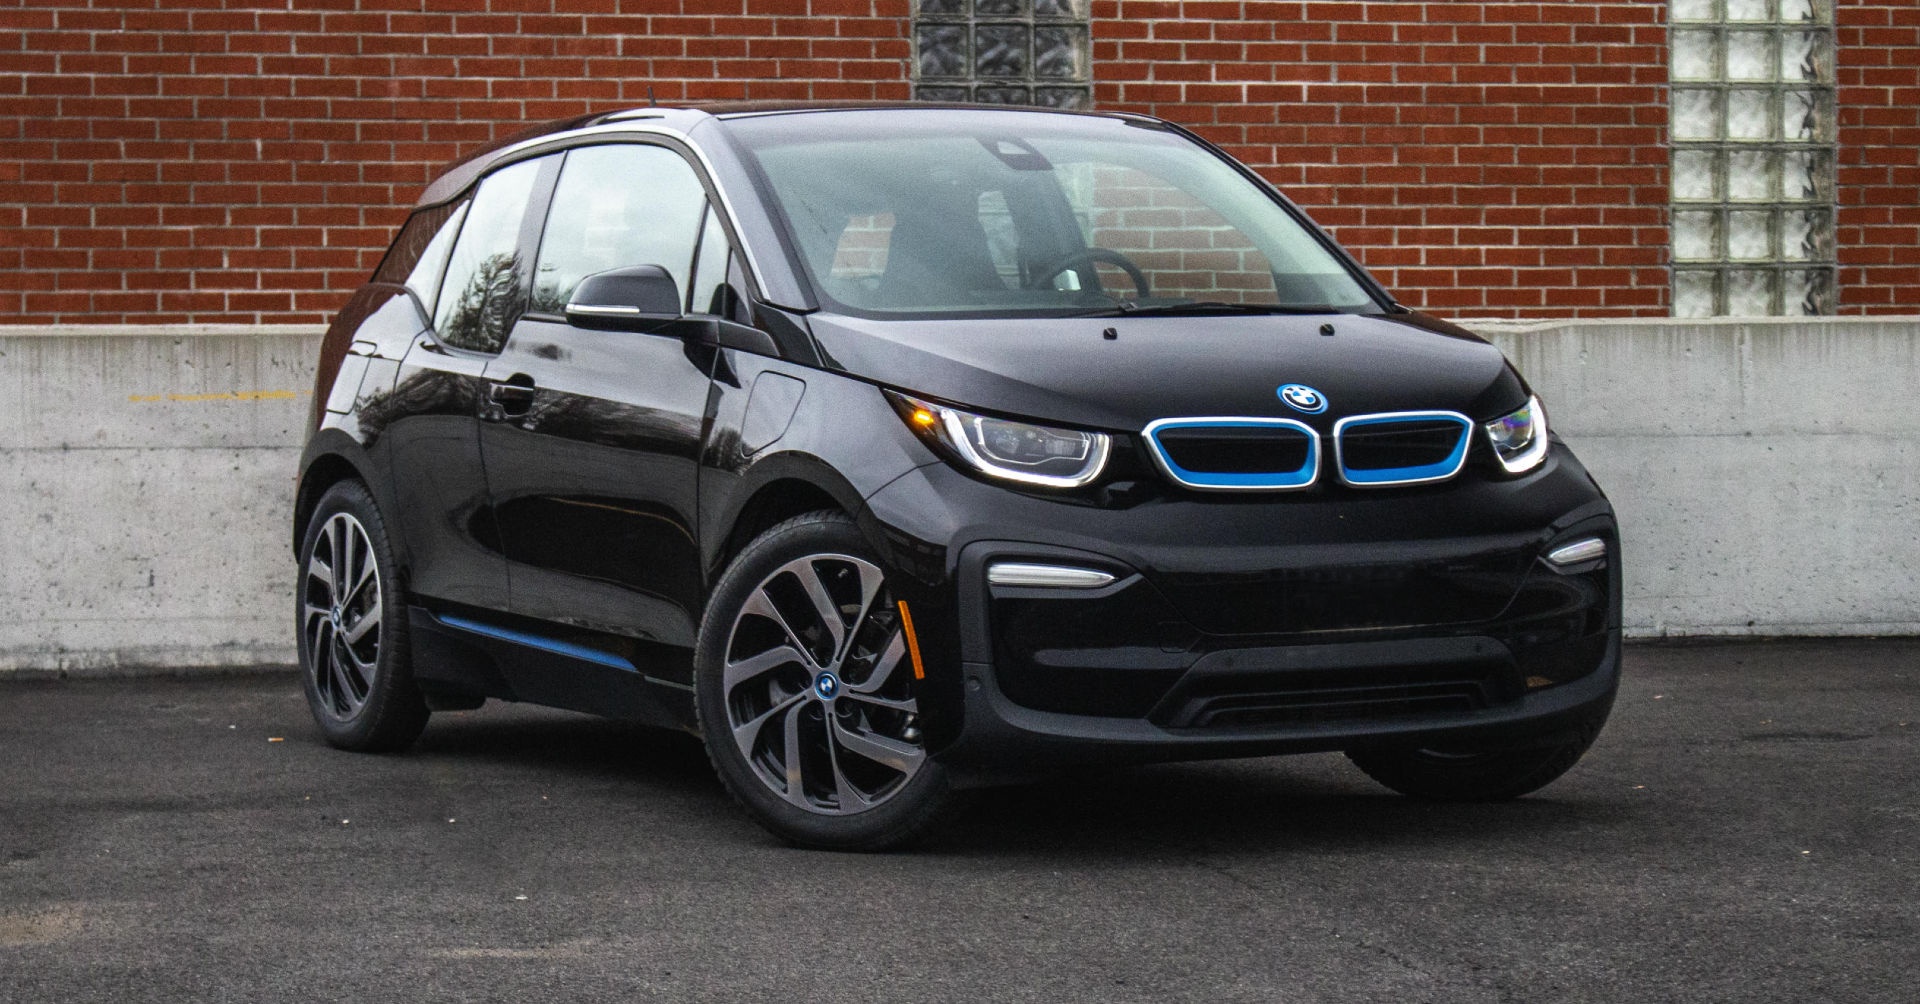 New Power for the BMW i3 Hybrid You'll Admire